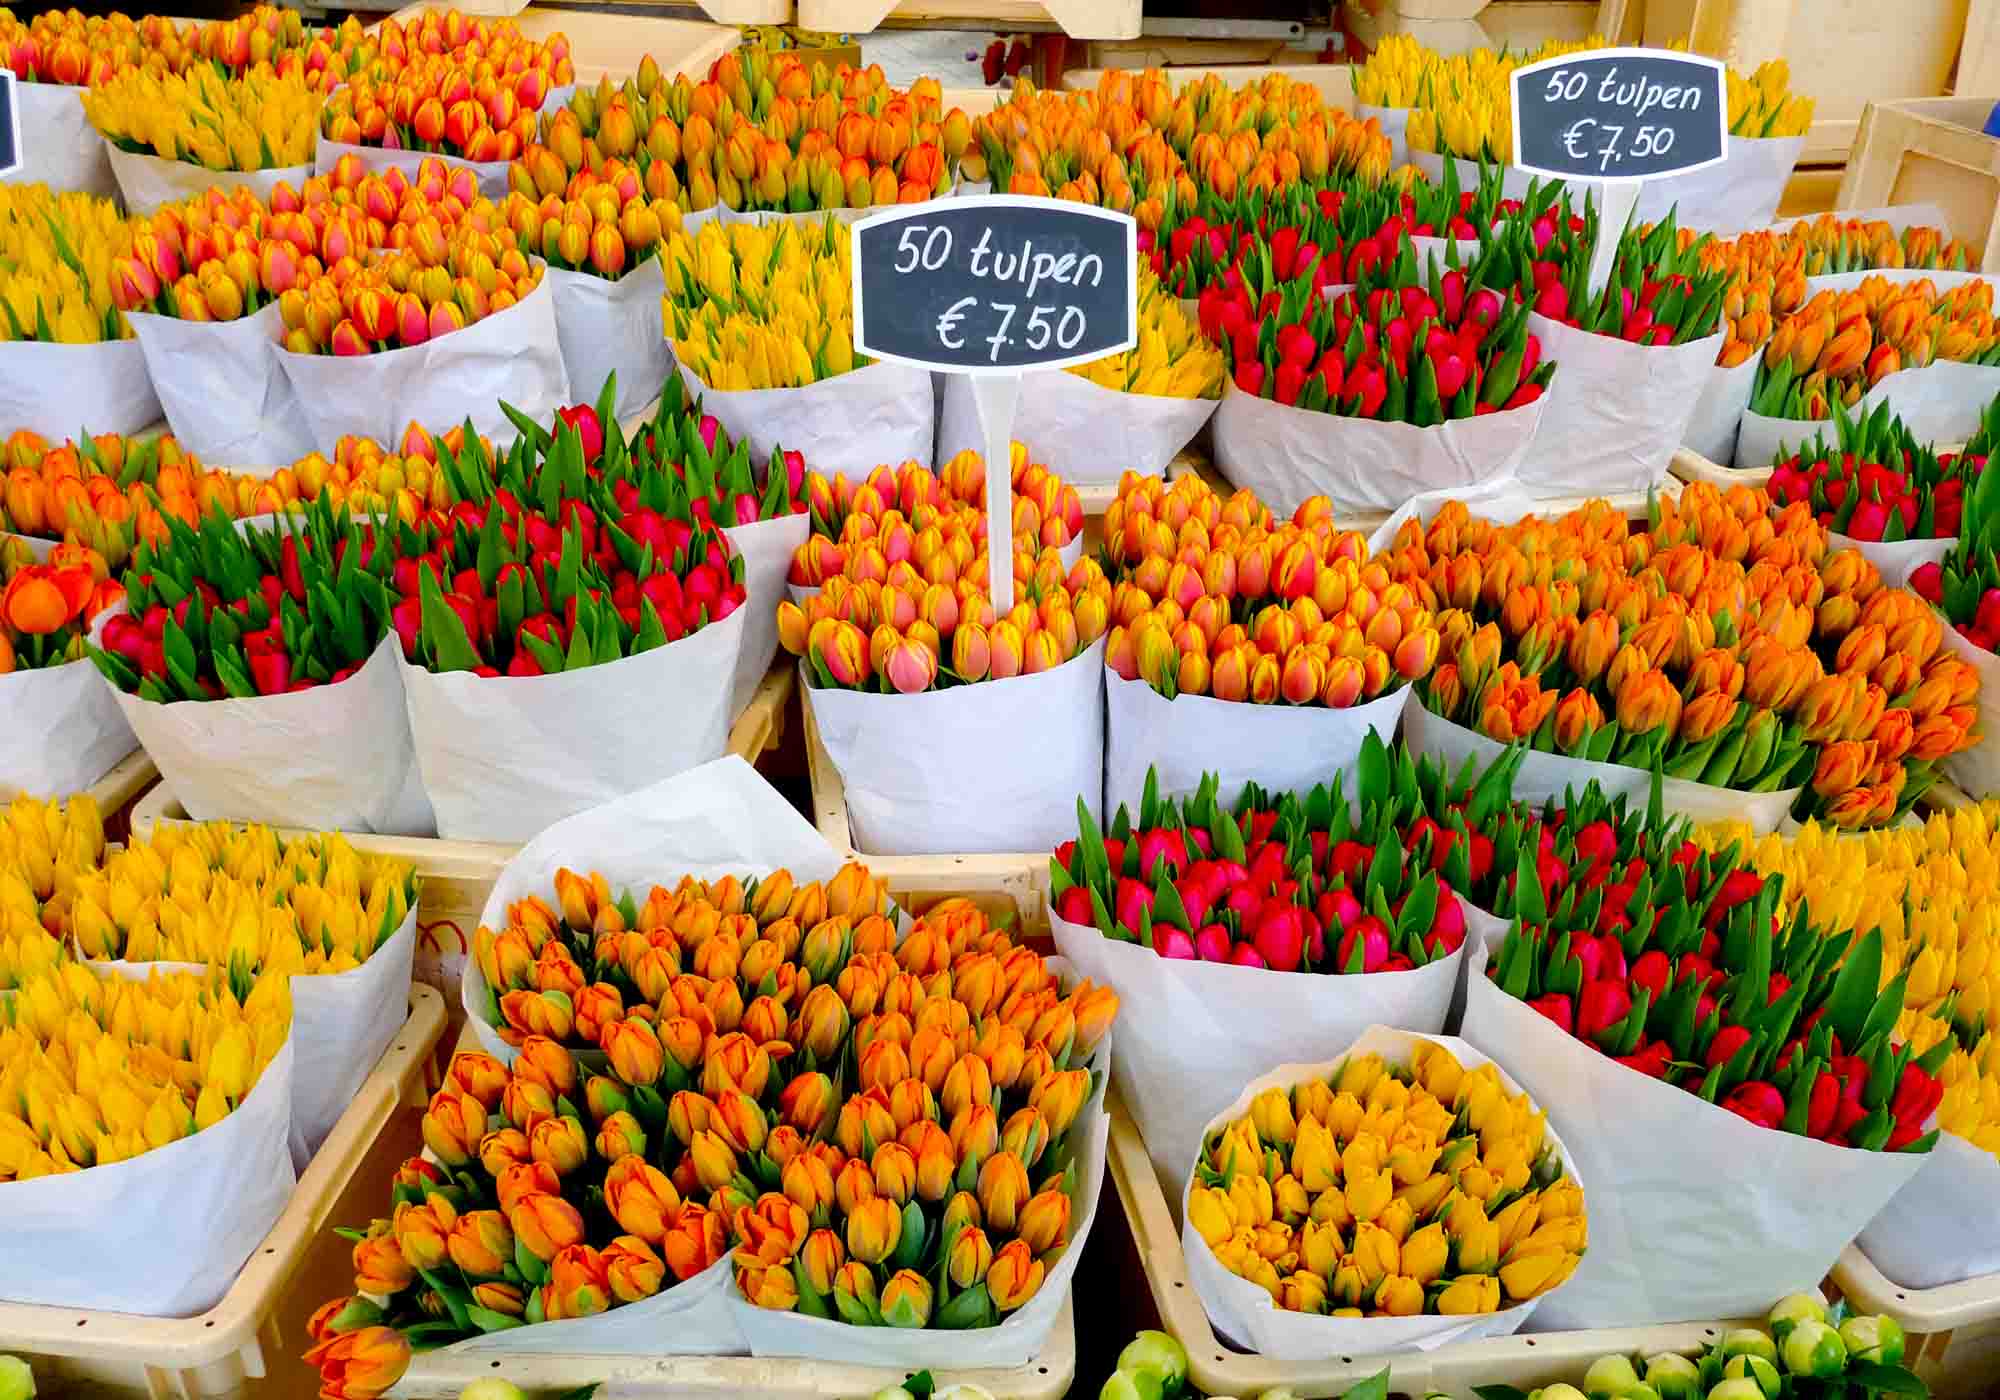 Colorful tulips on sale in Amsterdam flower market